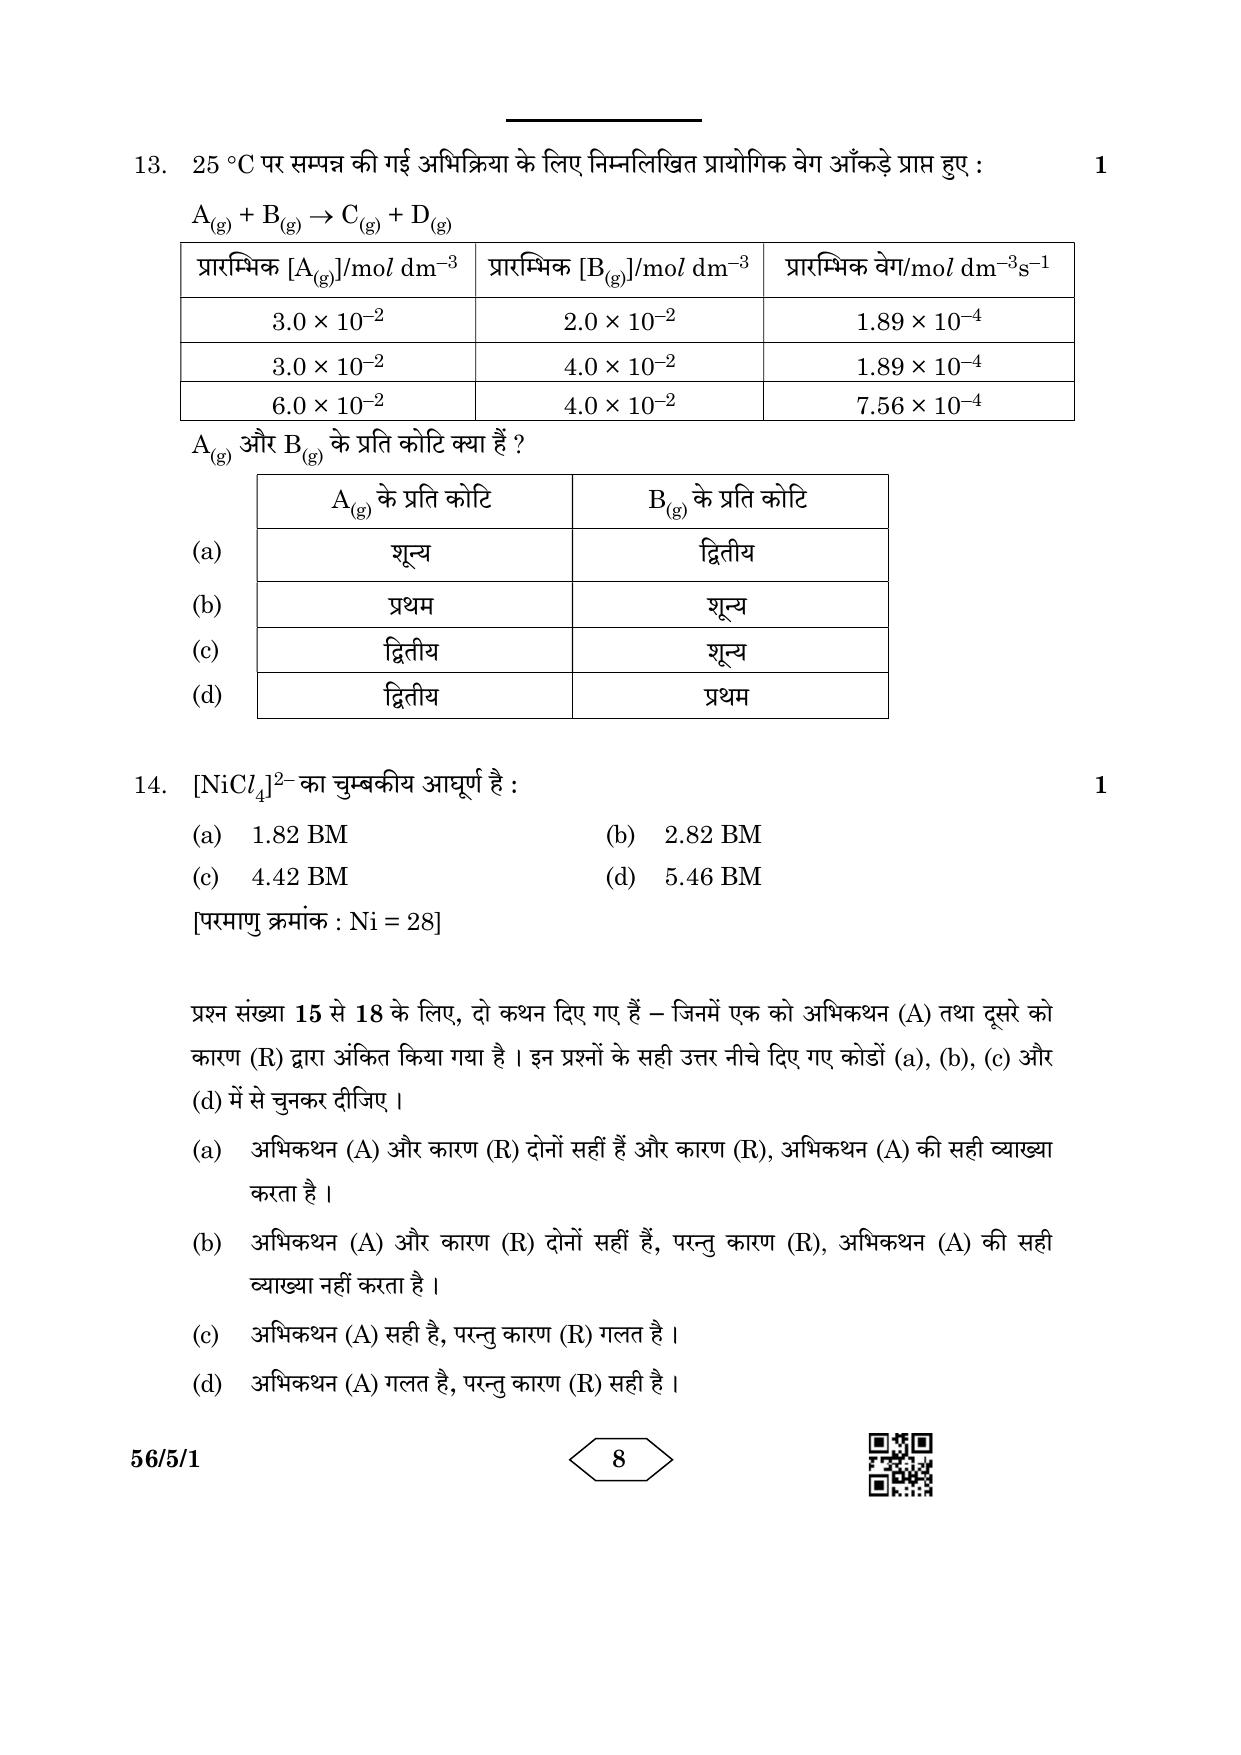 CBSE Class 12 56-5-1 Chemistry 2023 Question Paper - Page 8